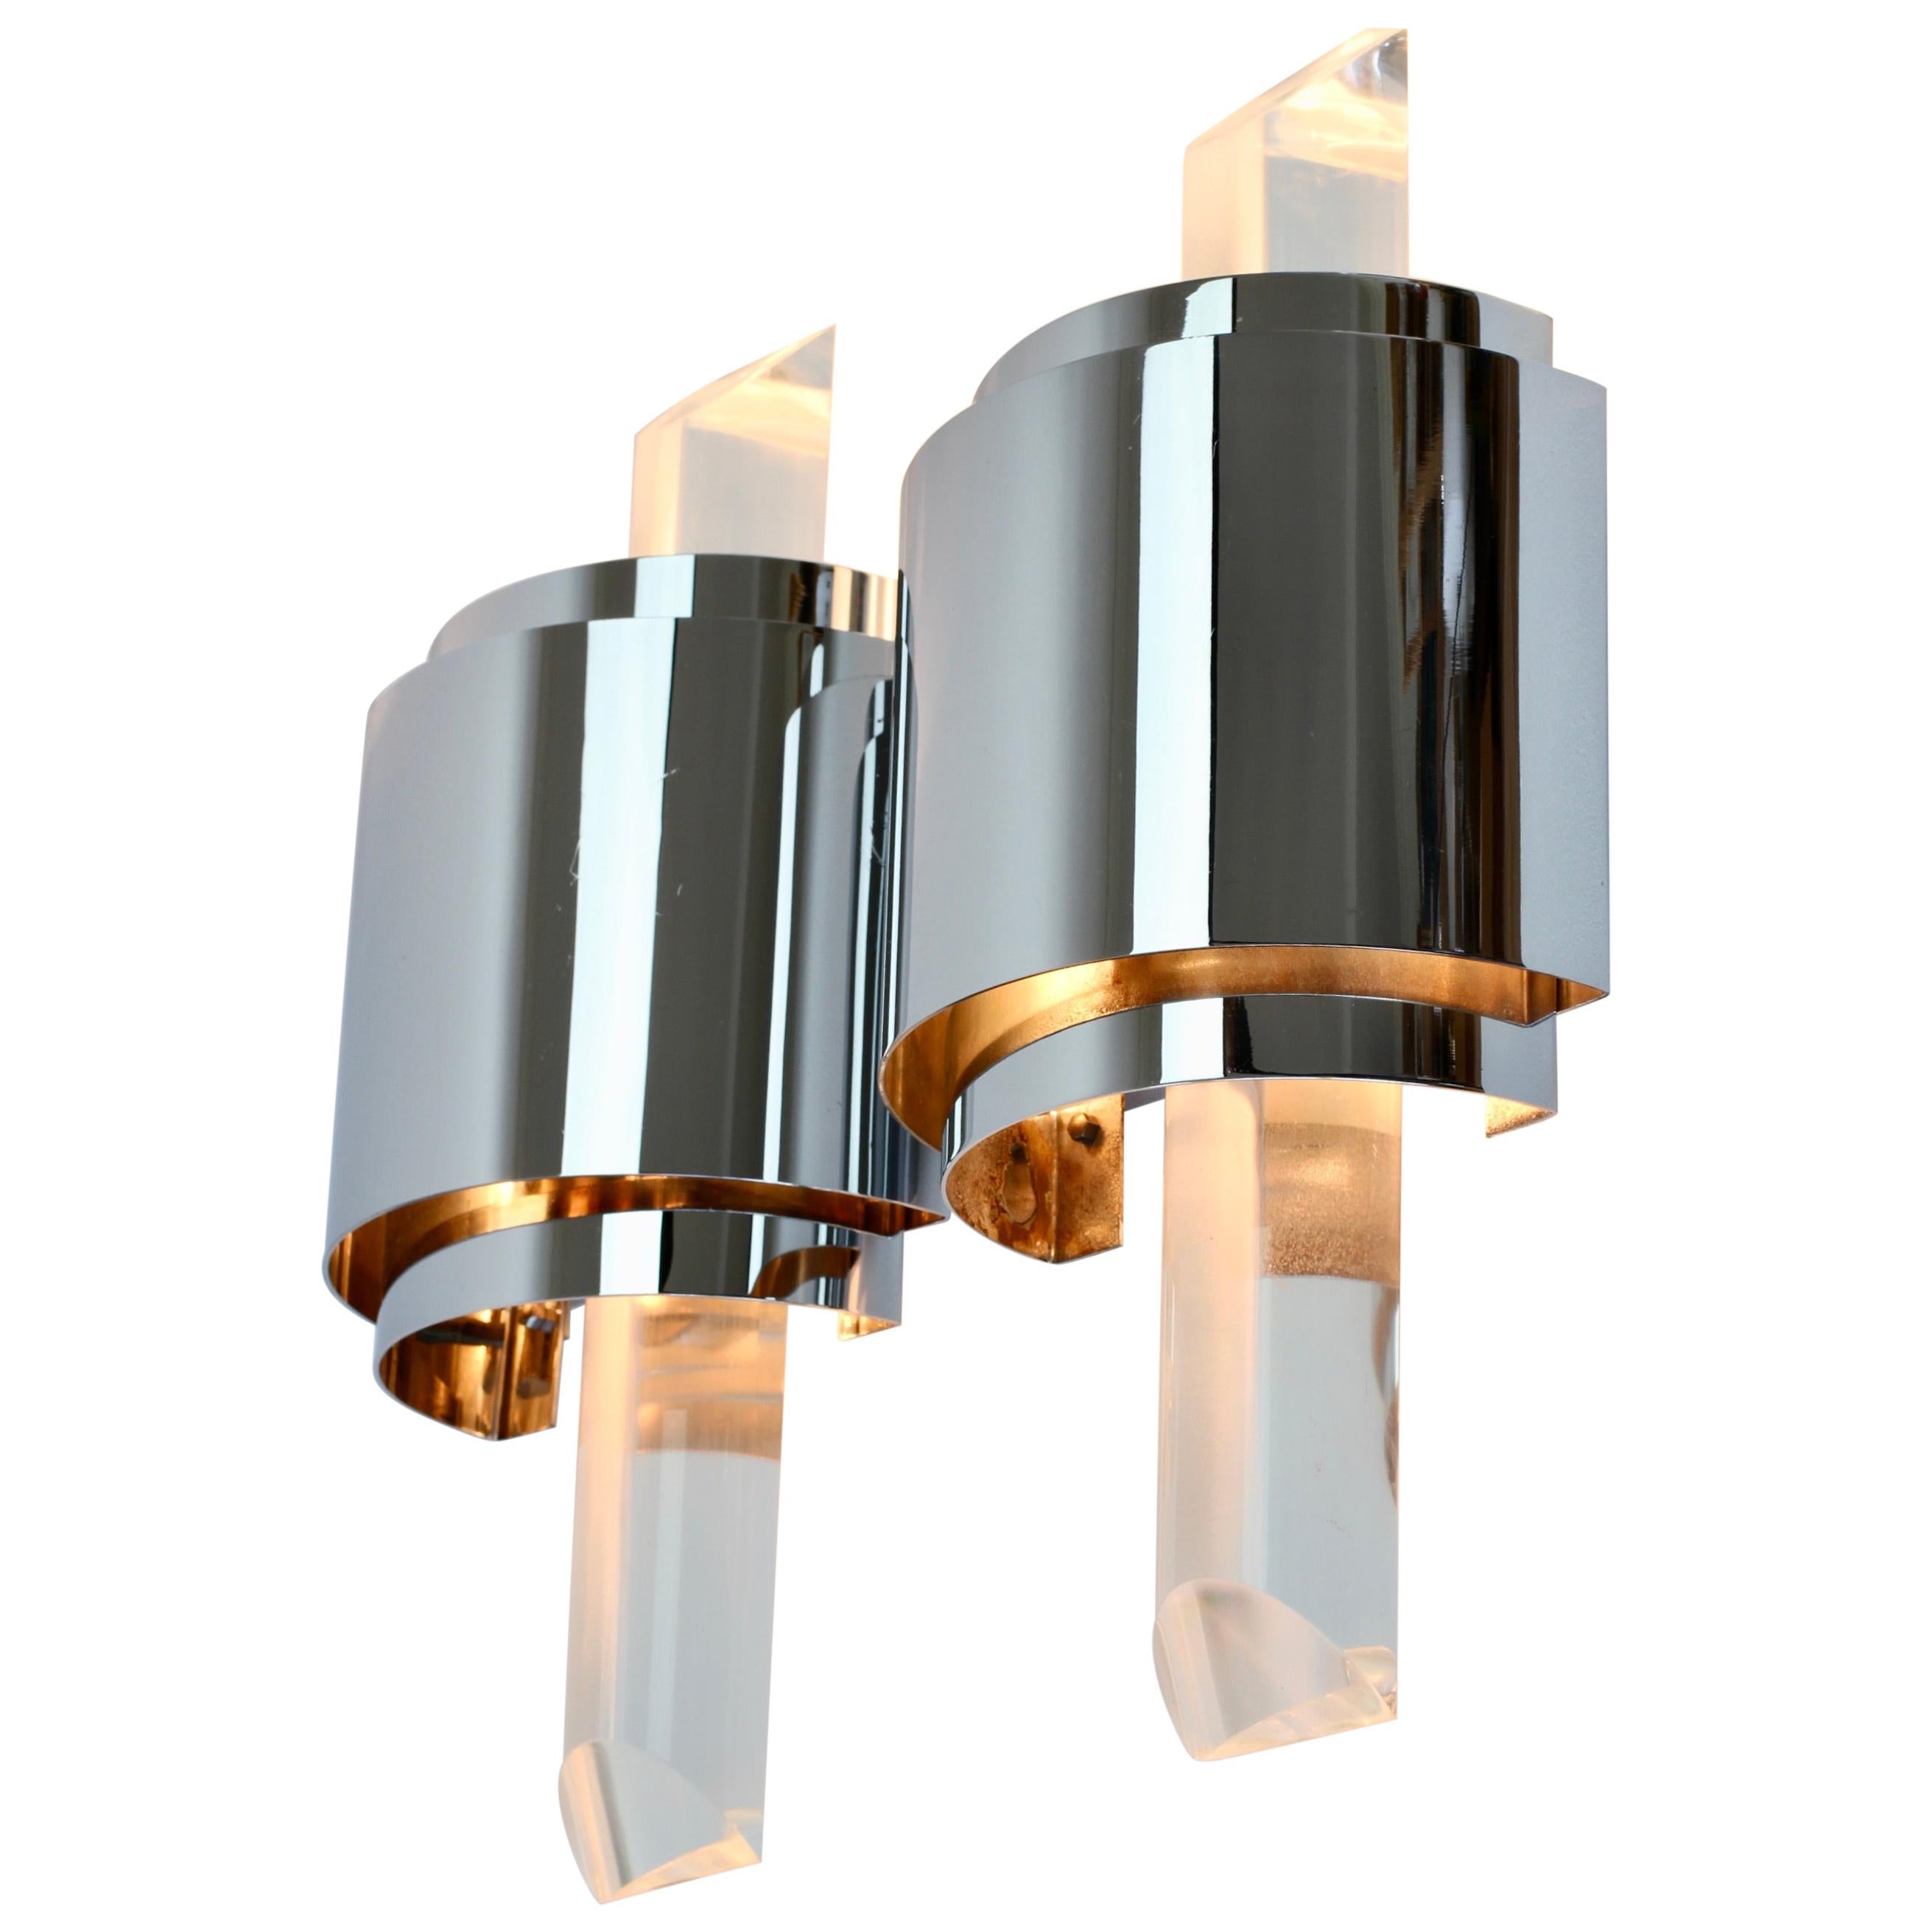 1 of 4 Large Vintage Hollywood Regency Lucite and Chrome Wall Lights or Sconces For Sale